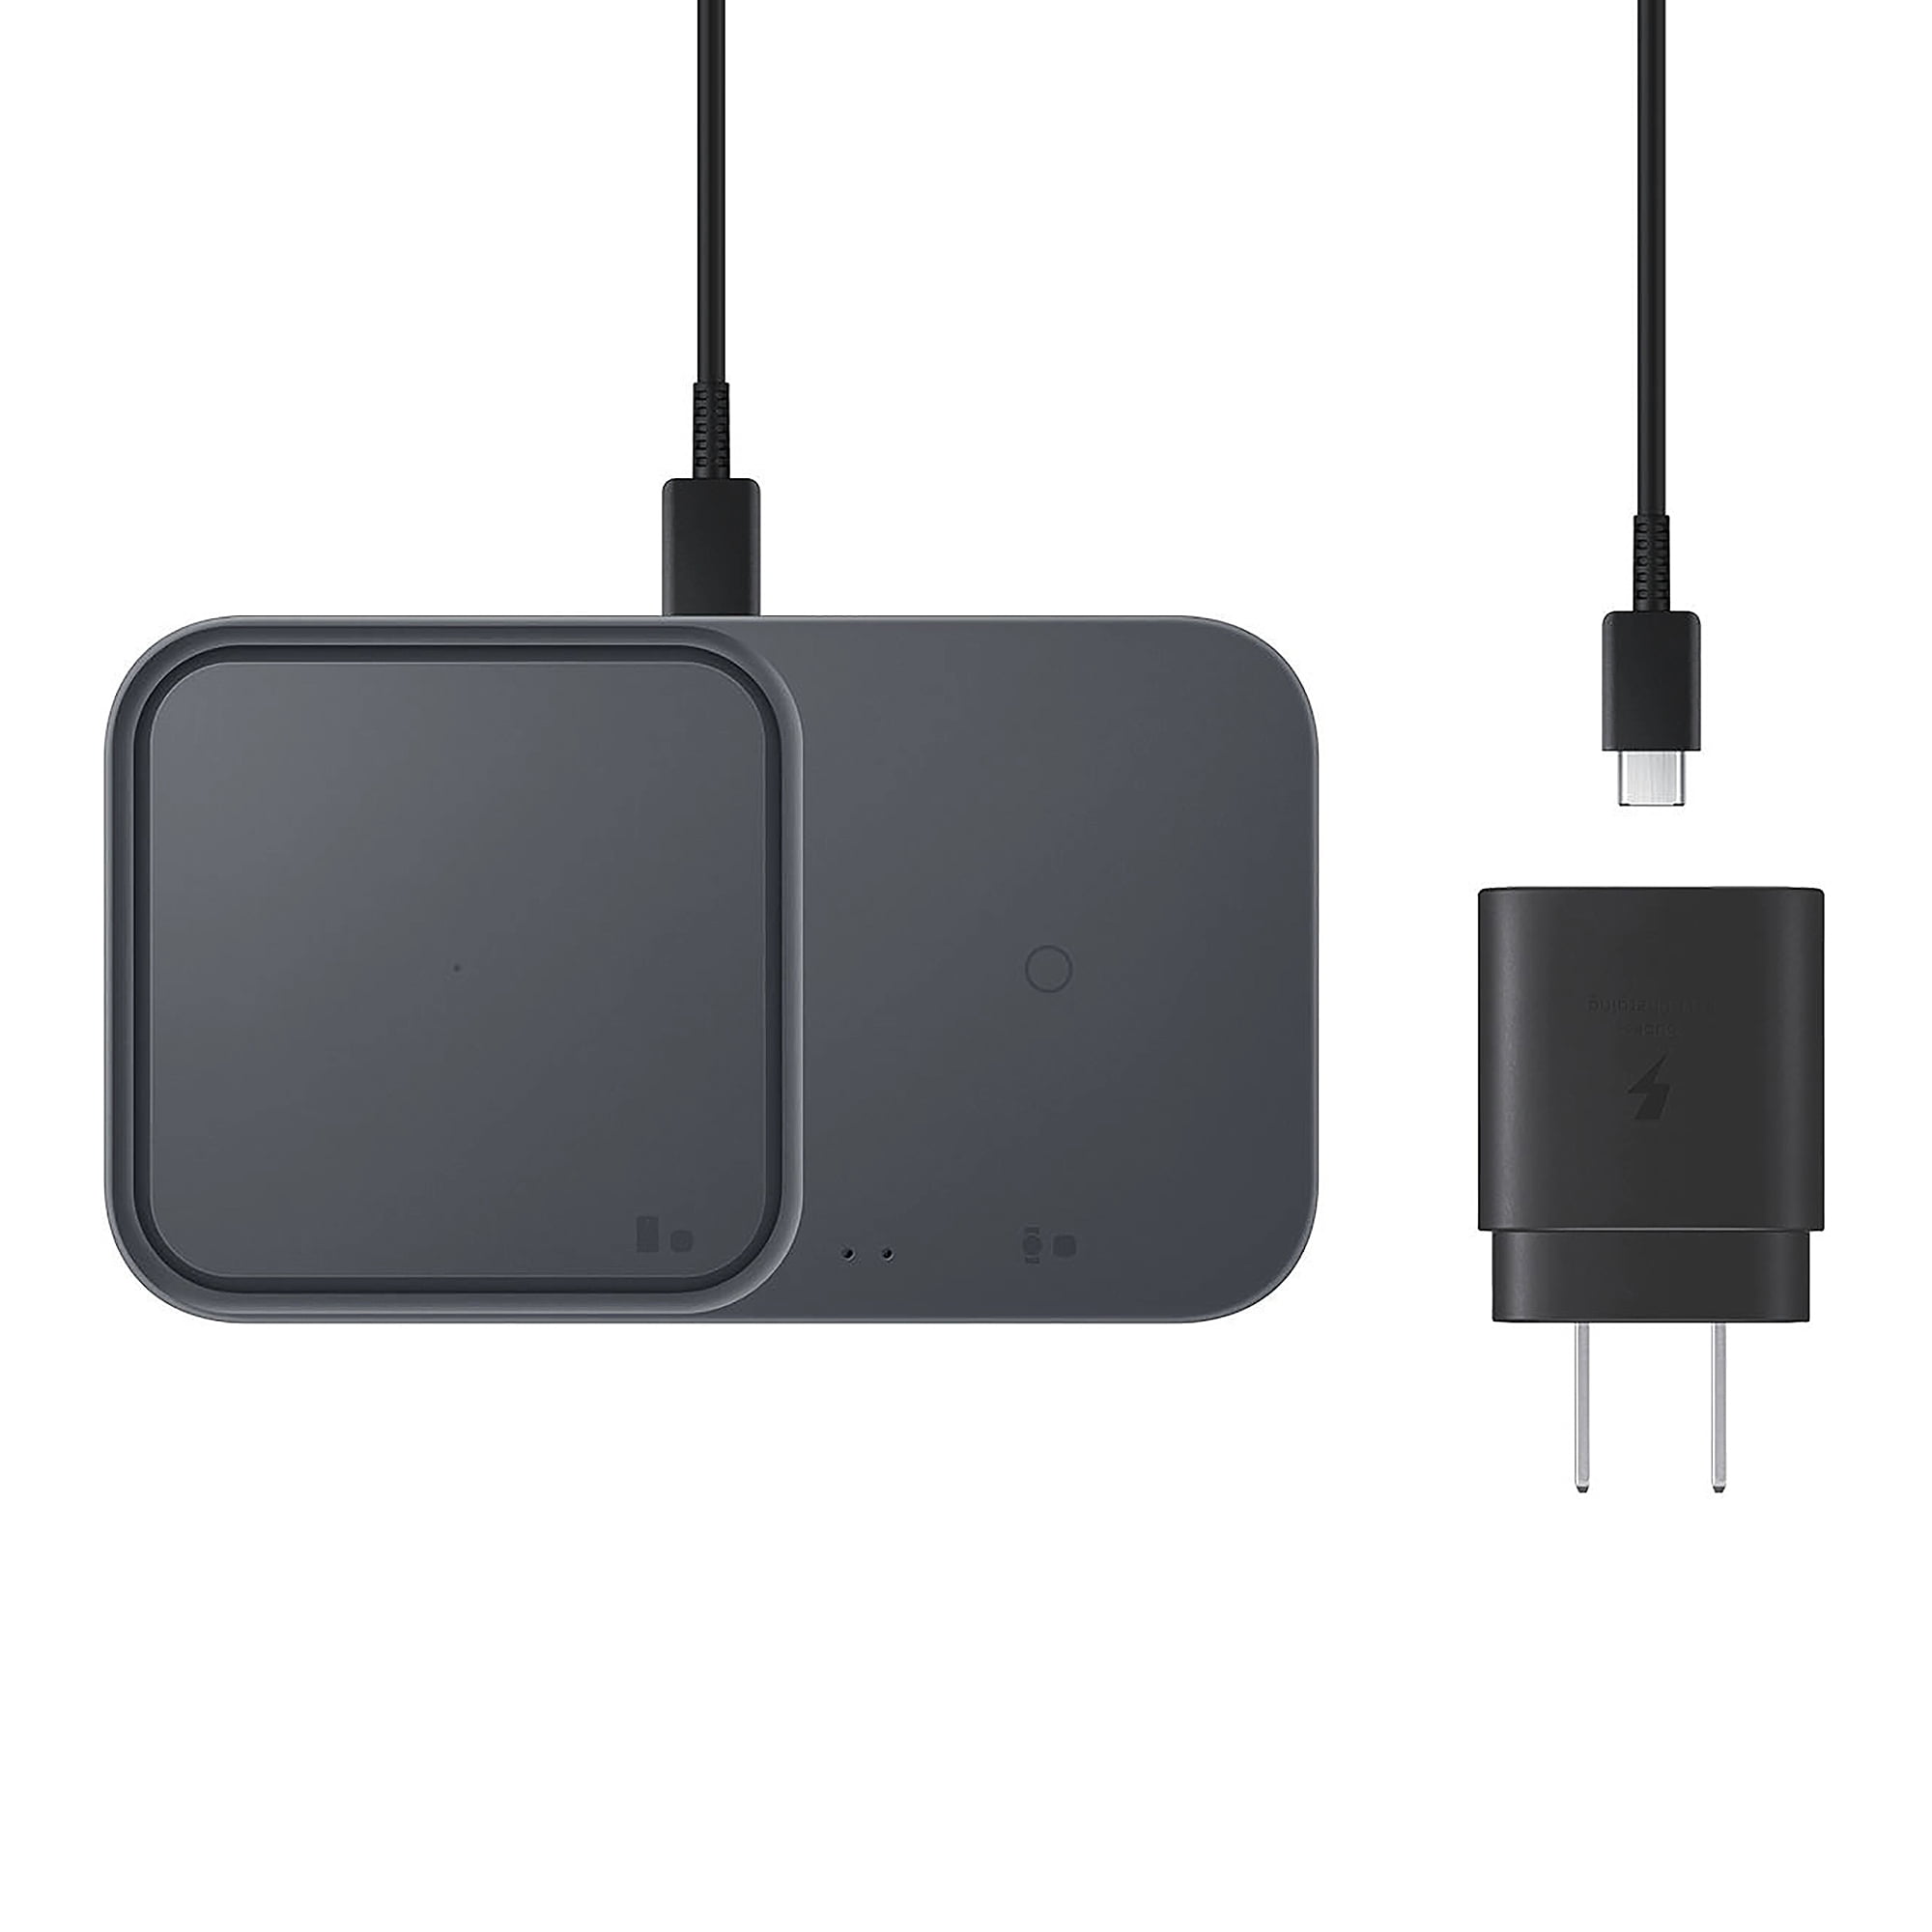 Samsung 15W Super Fast Wireless Charger DUO Pad with Travel Adapter - Dark  Gray - 2 in 1 Stand for Galaxy S23 S22 Ultra, Android Phones, Buds, Smart